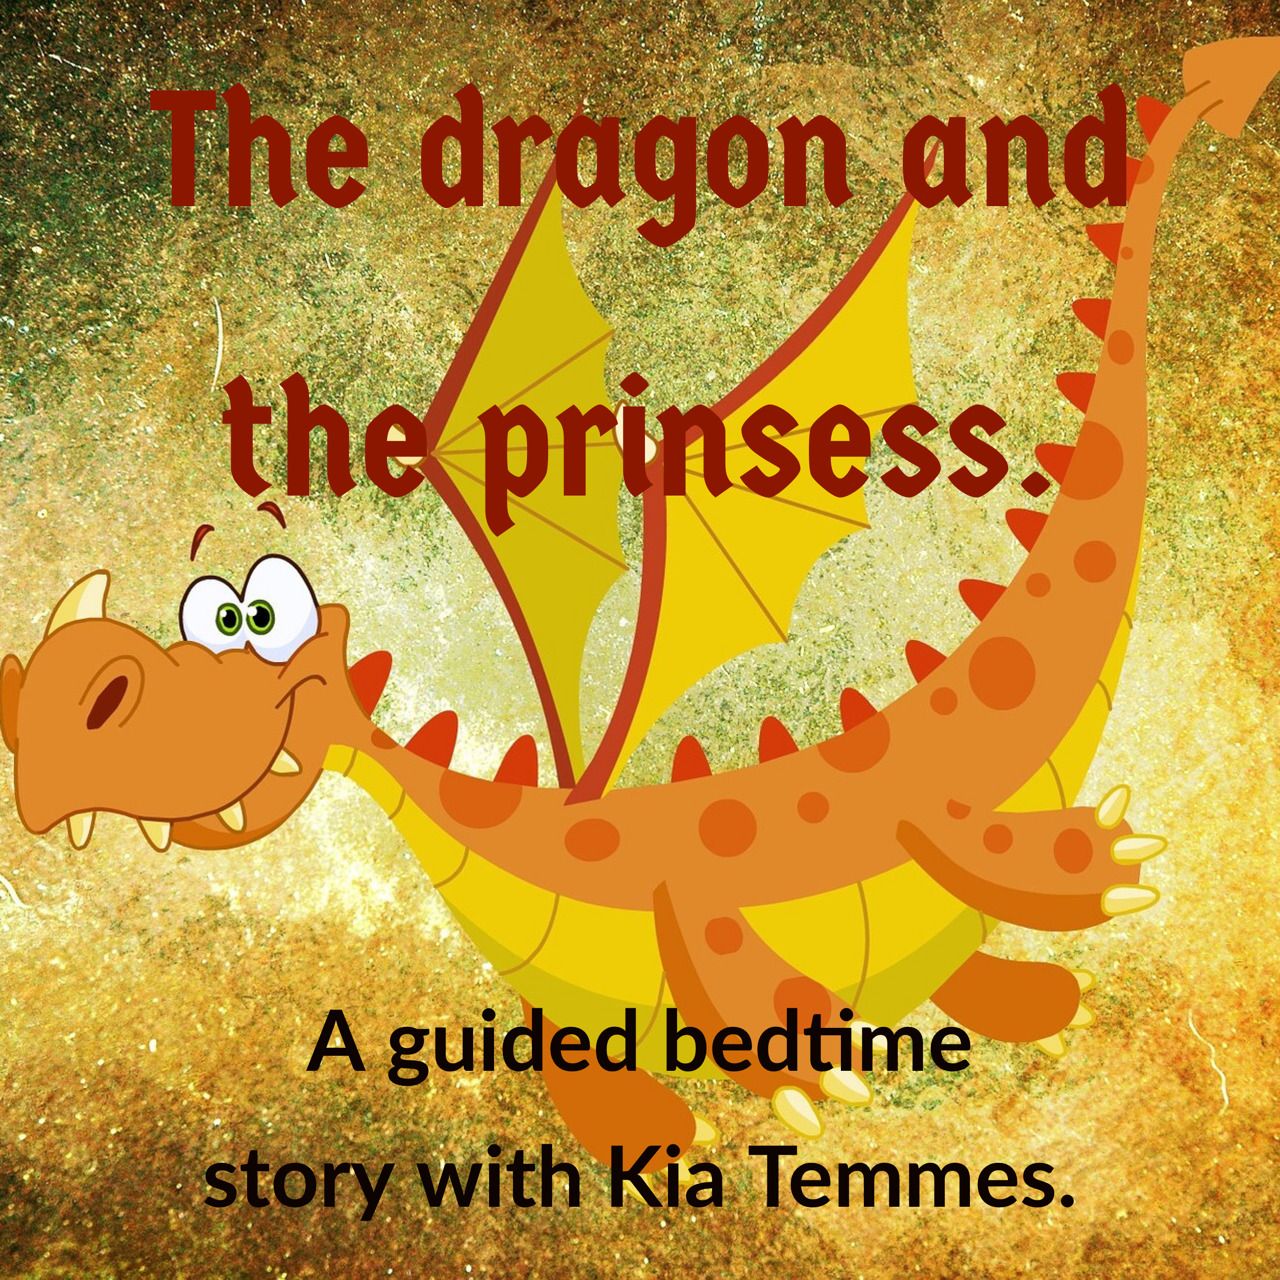 The Dragon and the princess - guided bedtime story, audiobook by Kia Temmes